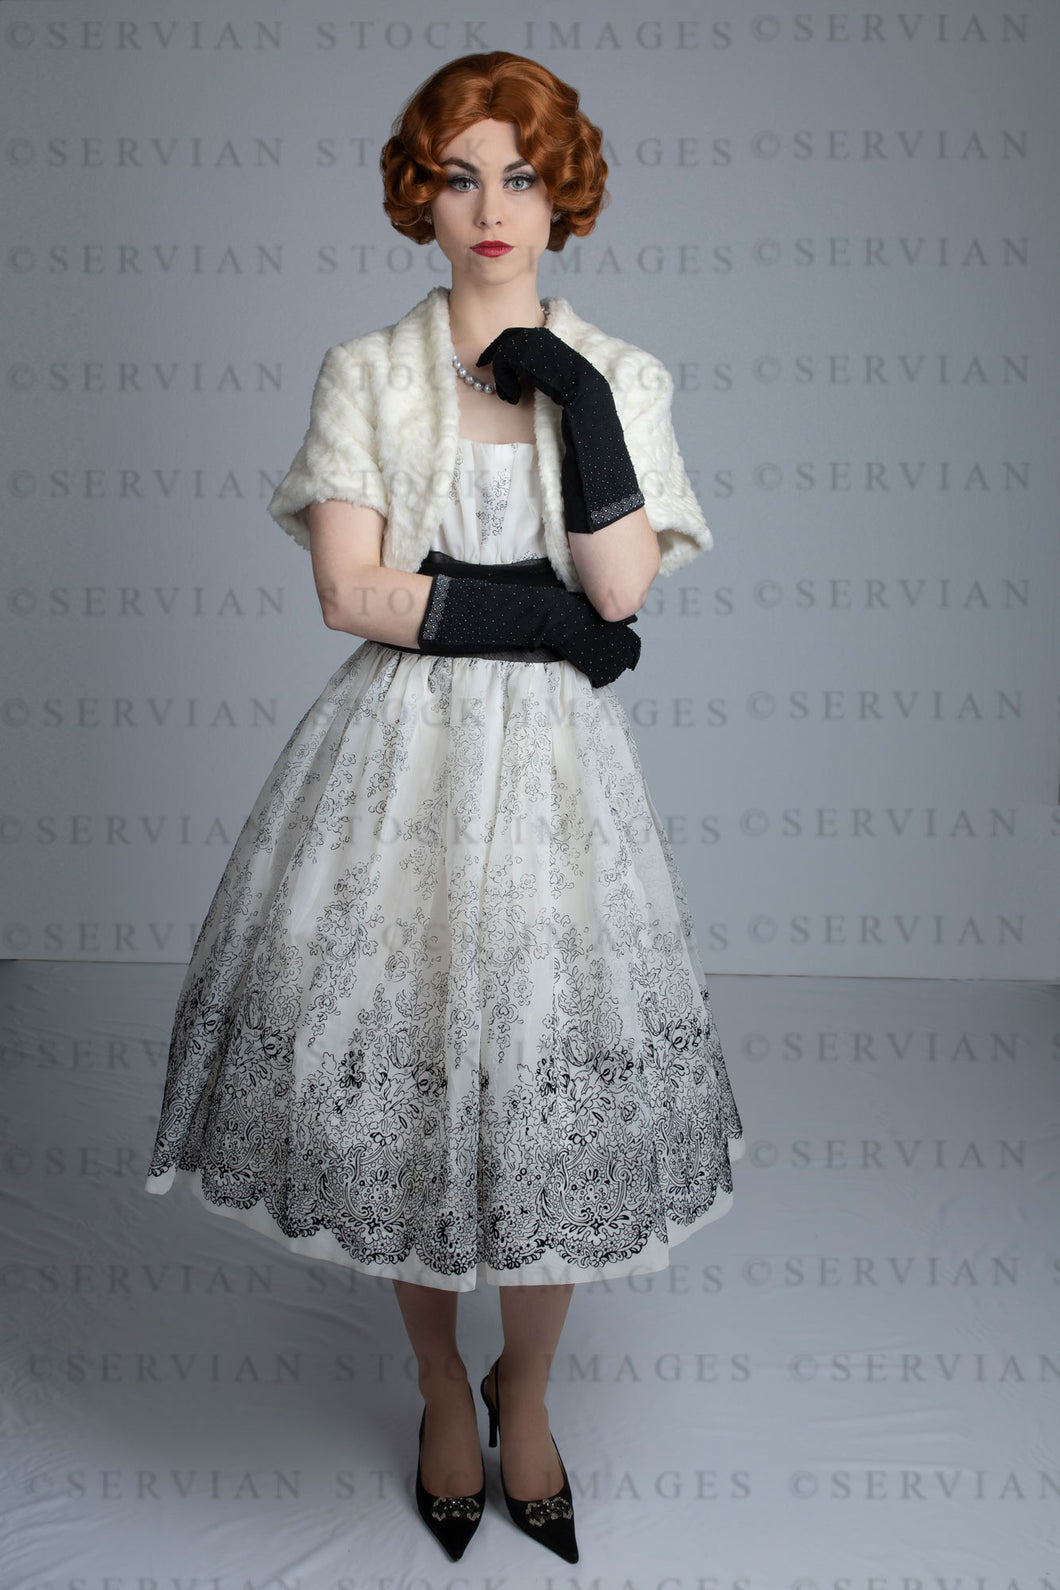 1950s woman in vintage dress, white fur shrug, and black gloves (Lacey 2503)